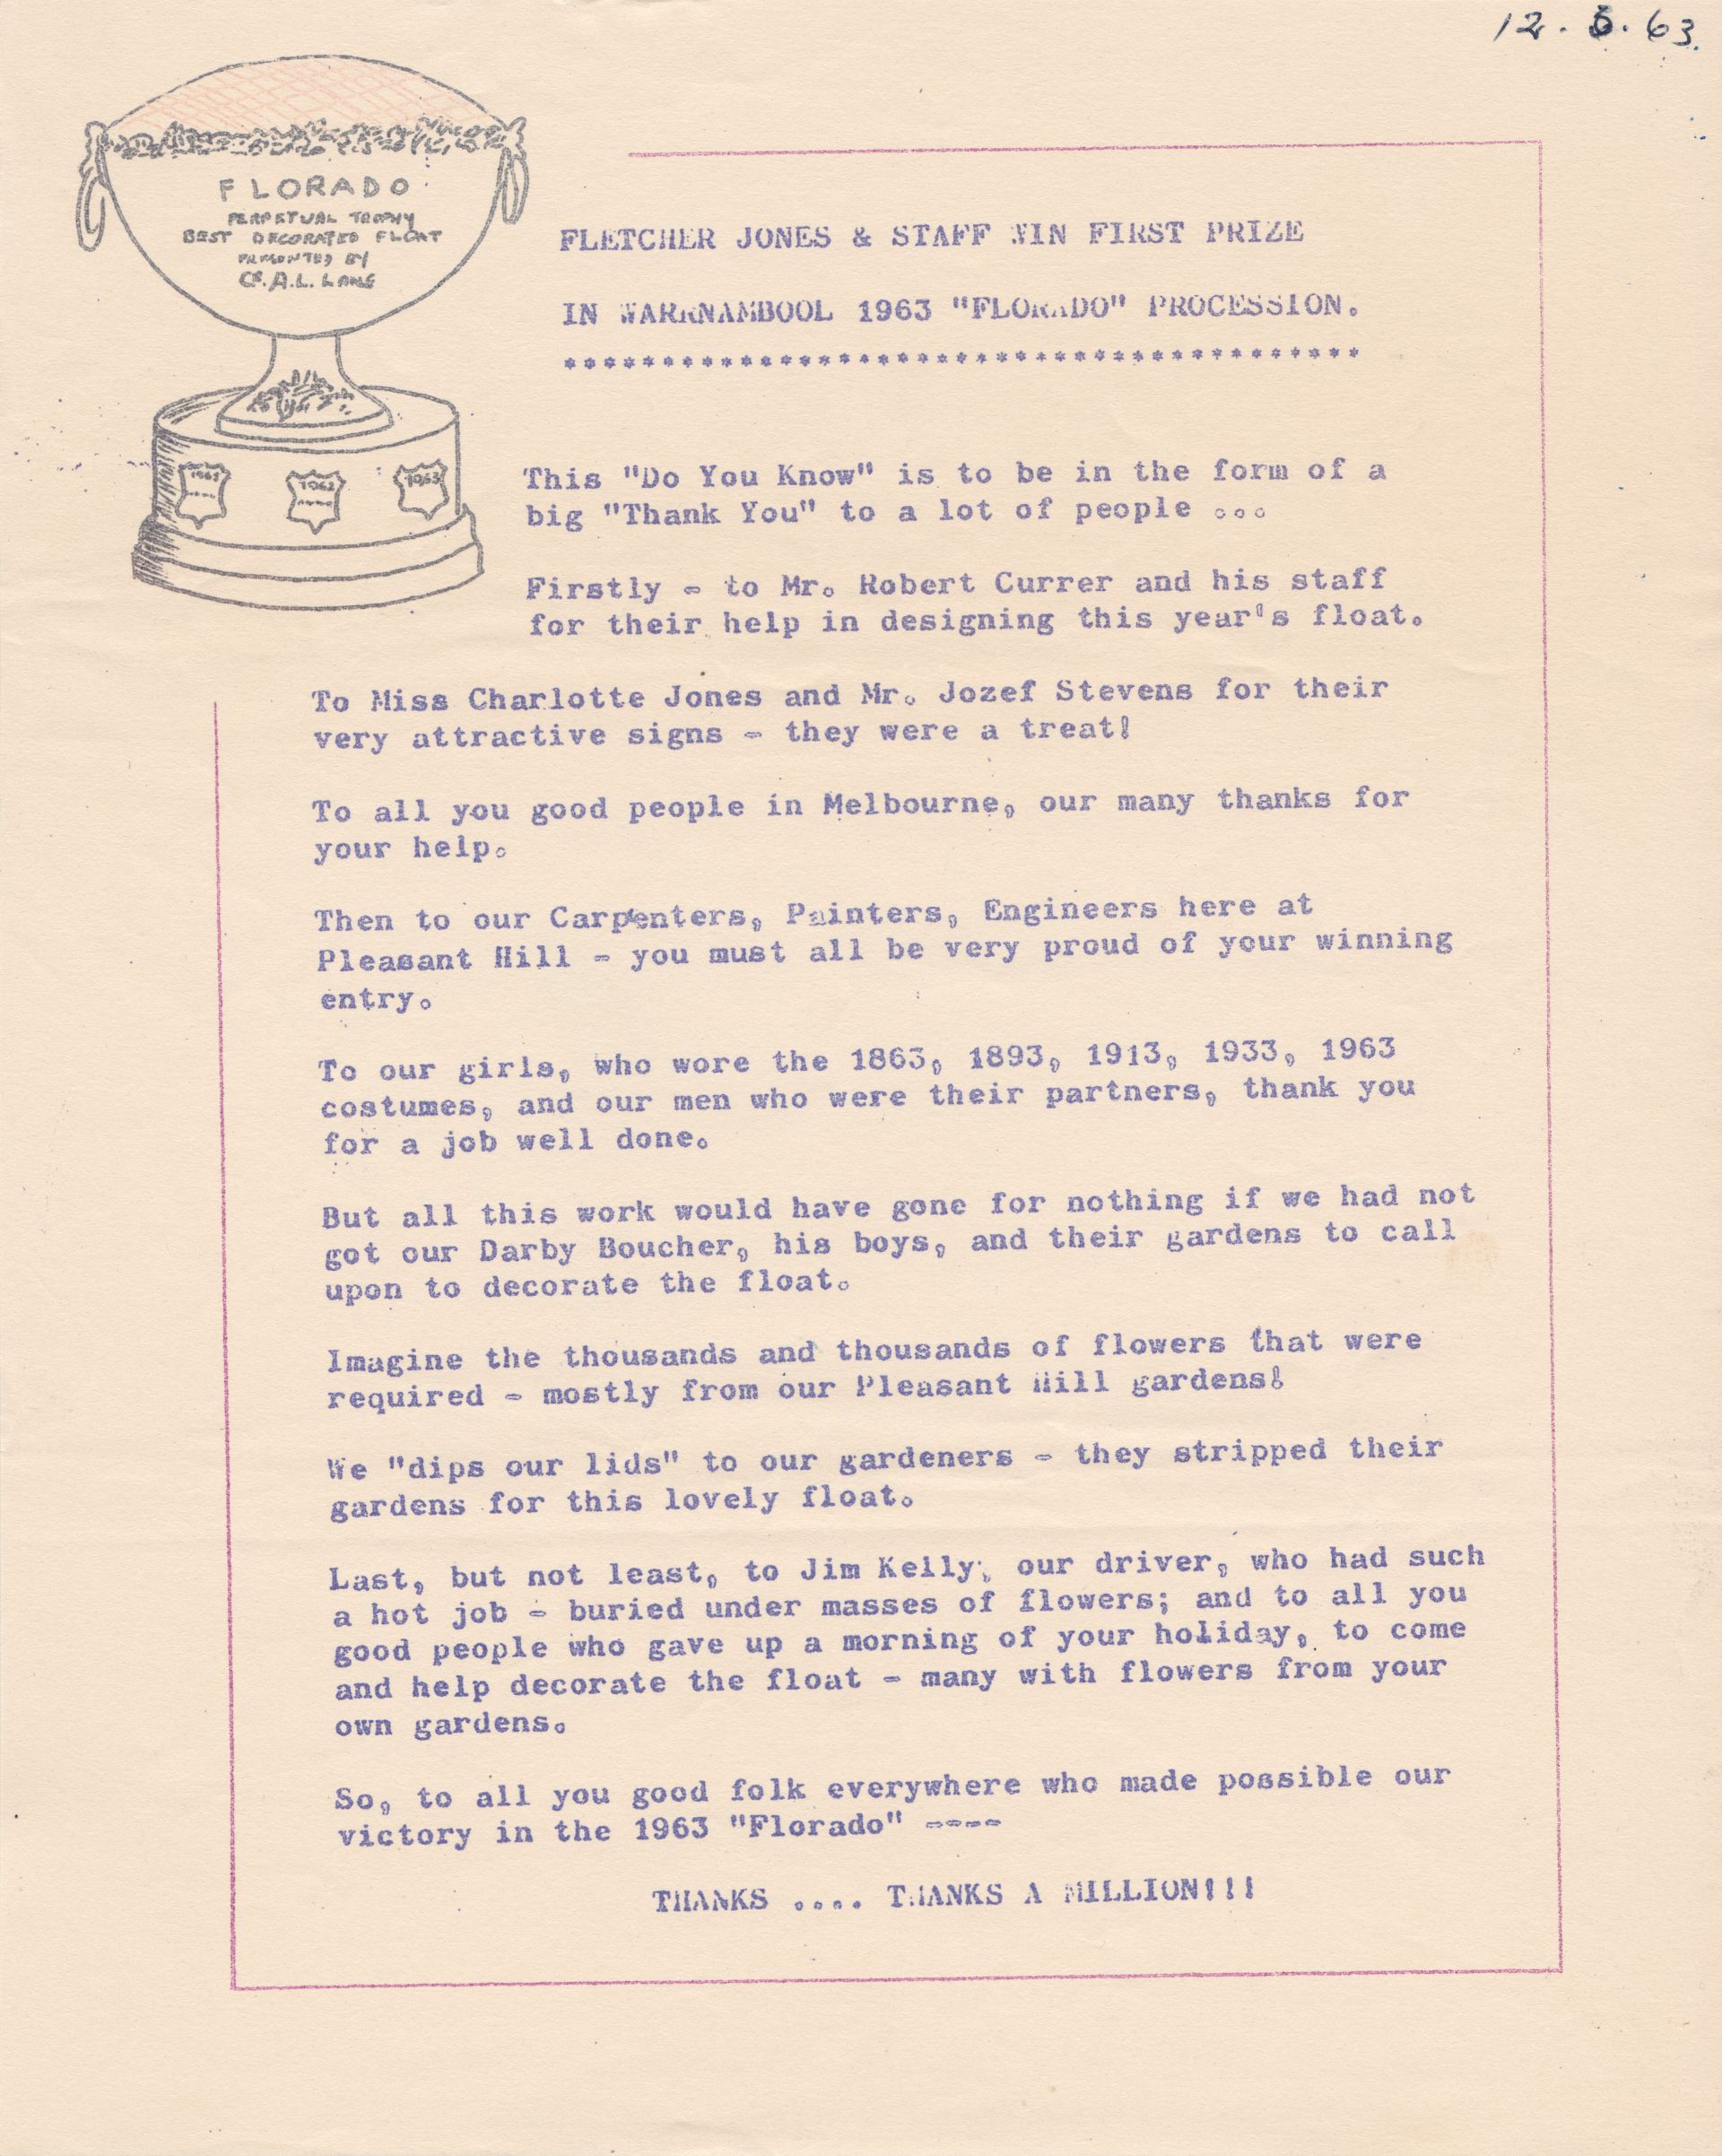 FJ Staff Bulletin detailing the 1963 win.  Shared by the Jones Family